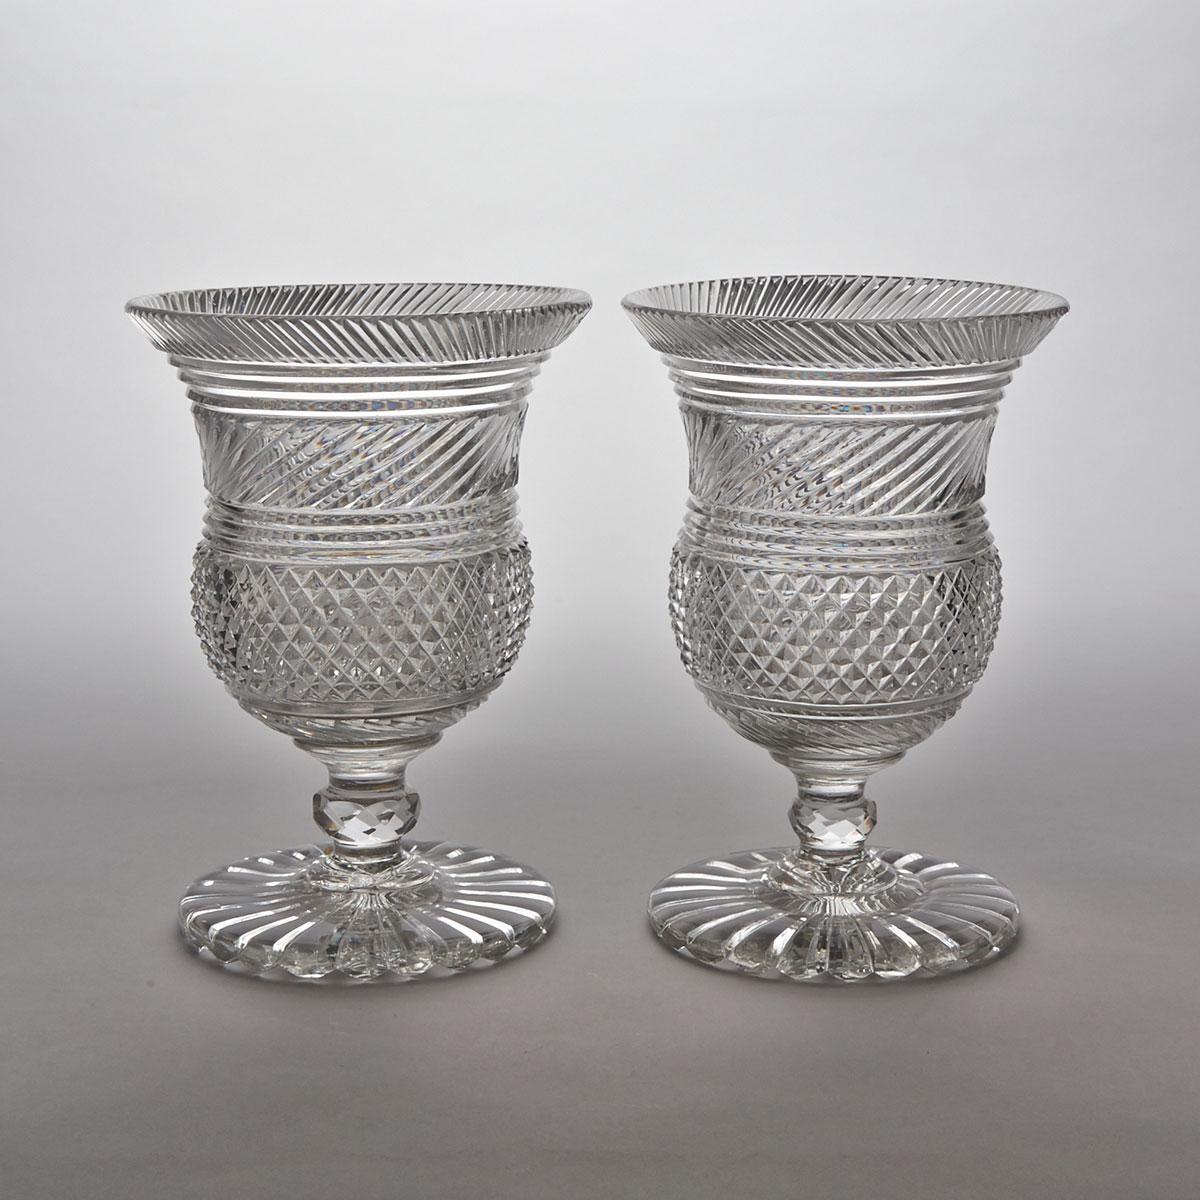 Pair of Anglo-Irish Cut Glass Vases, early 19th century